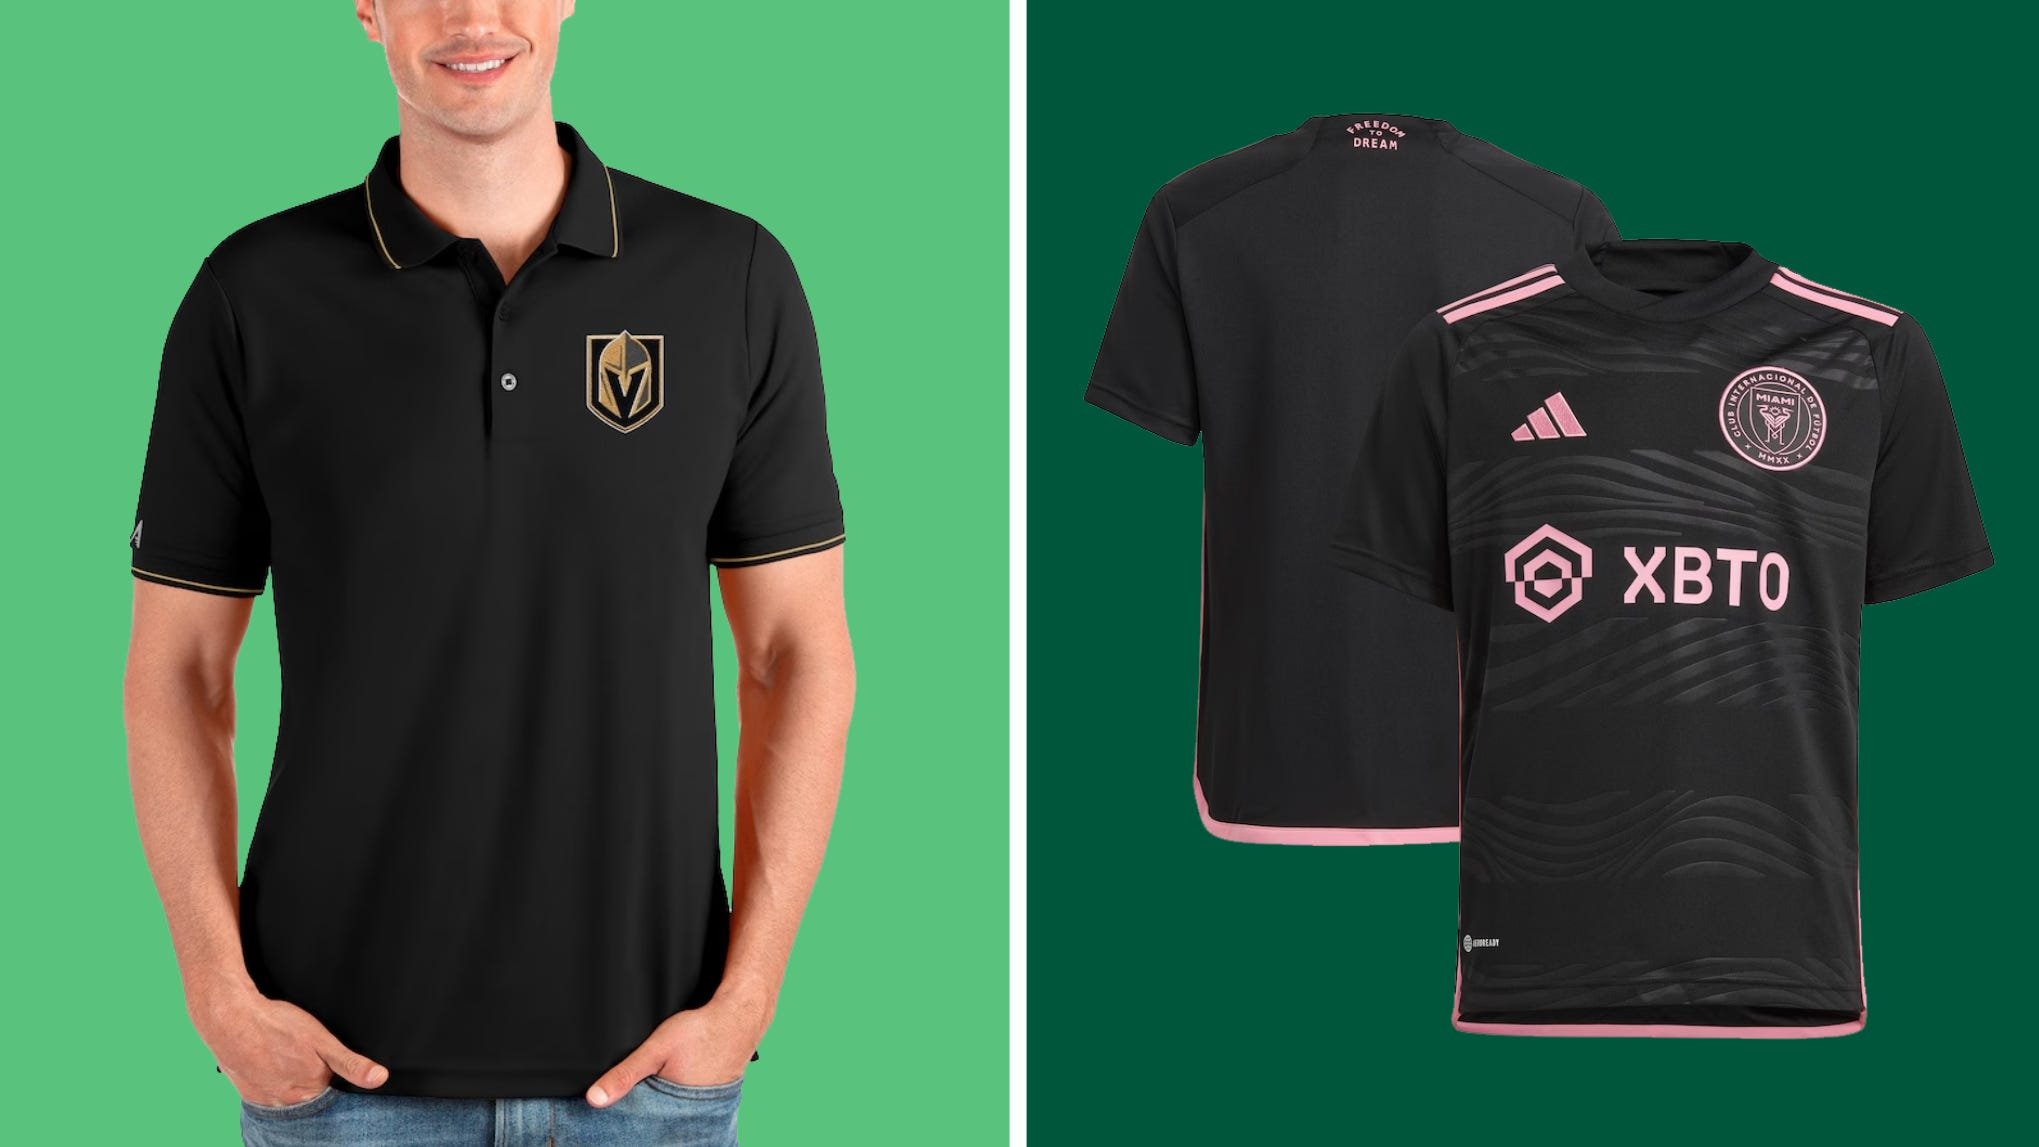 This could be your last chance to save up to 65% off fan apparel at Fanatics before Father's Day